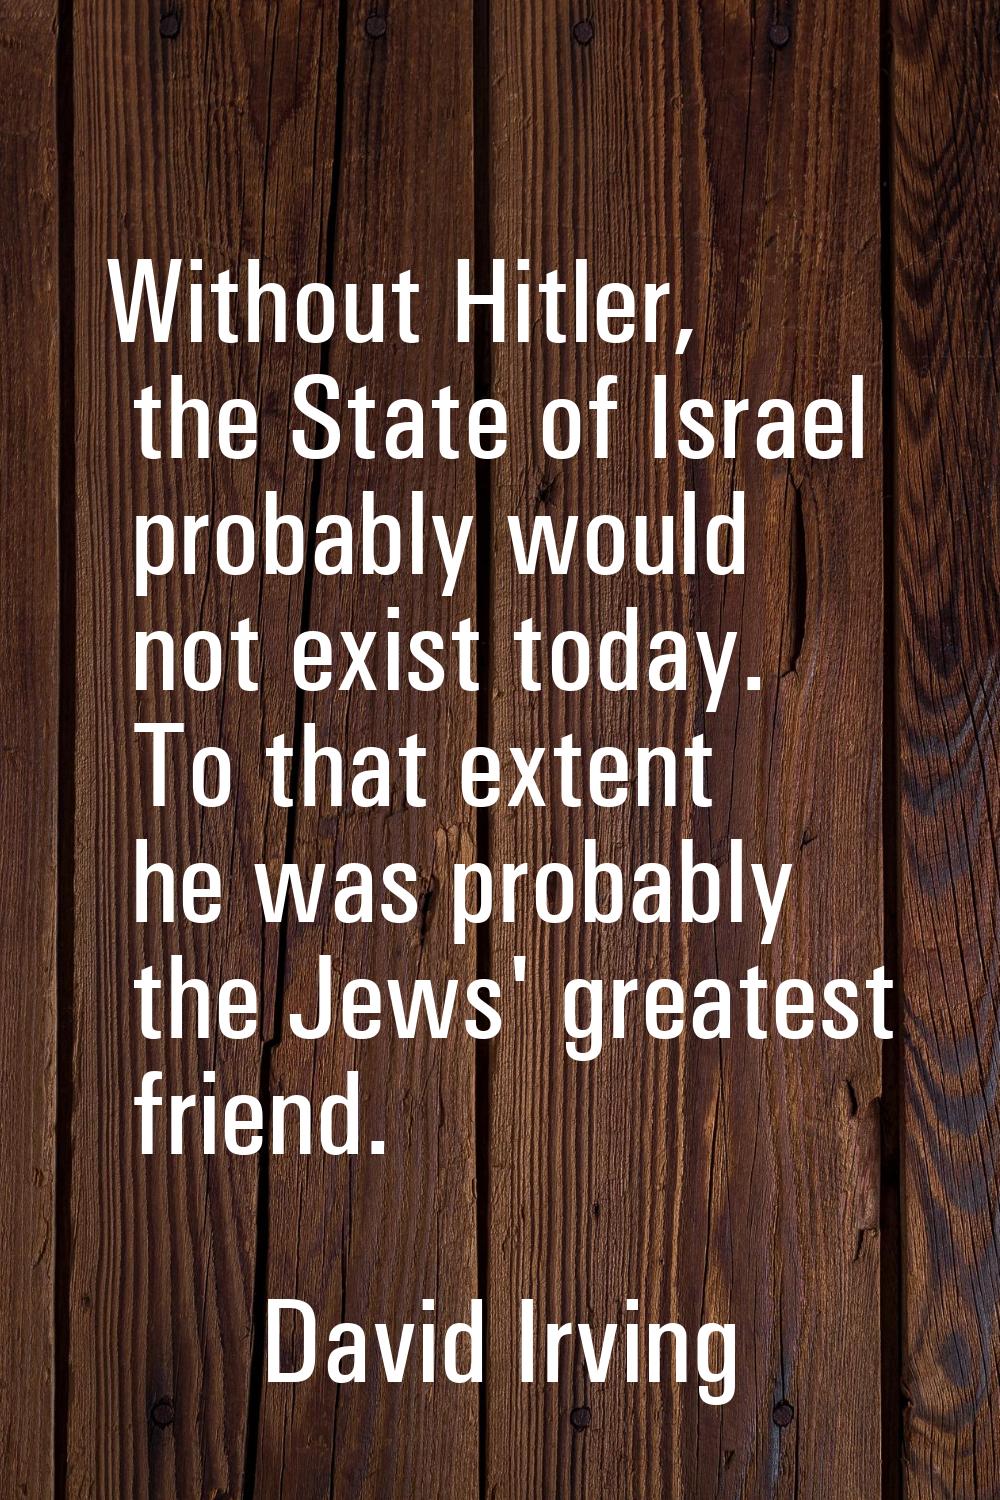 Without Hitler, the State of Israel probably would not exist today. To that extent he was probably 